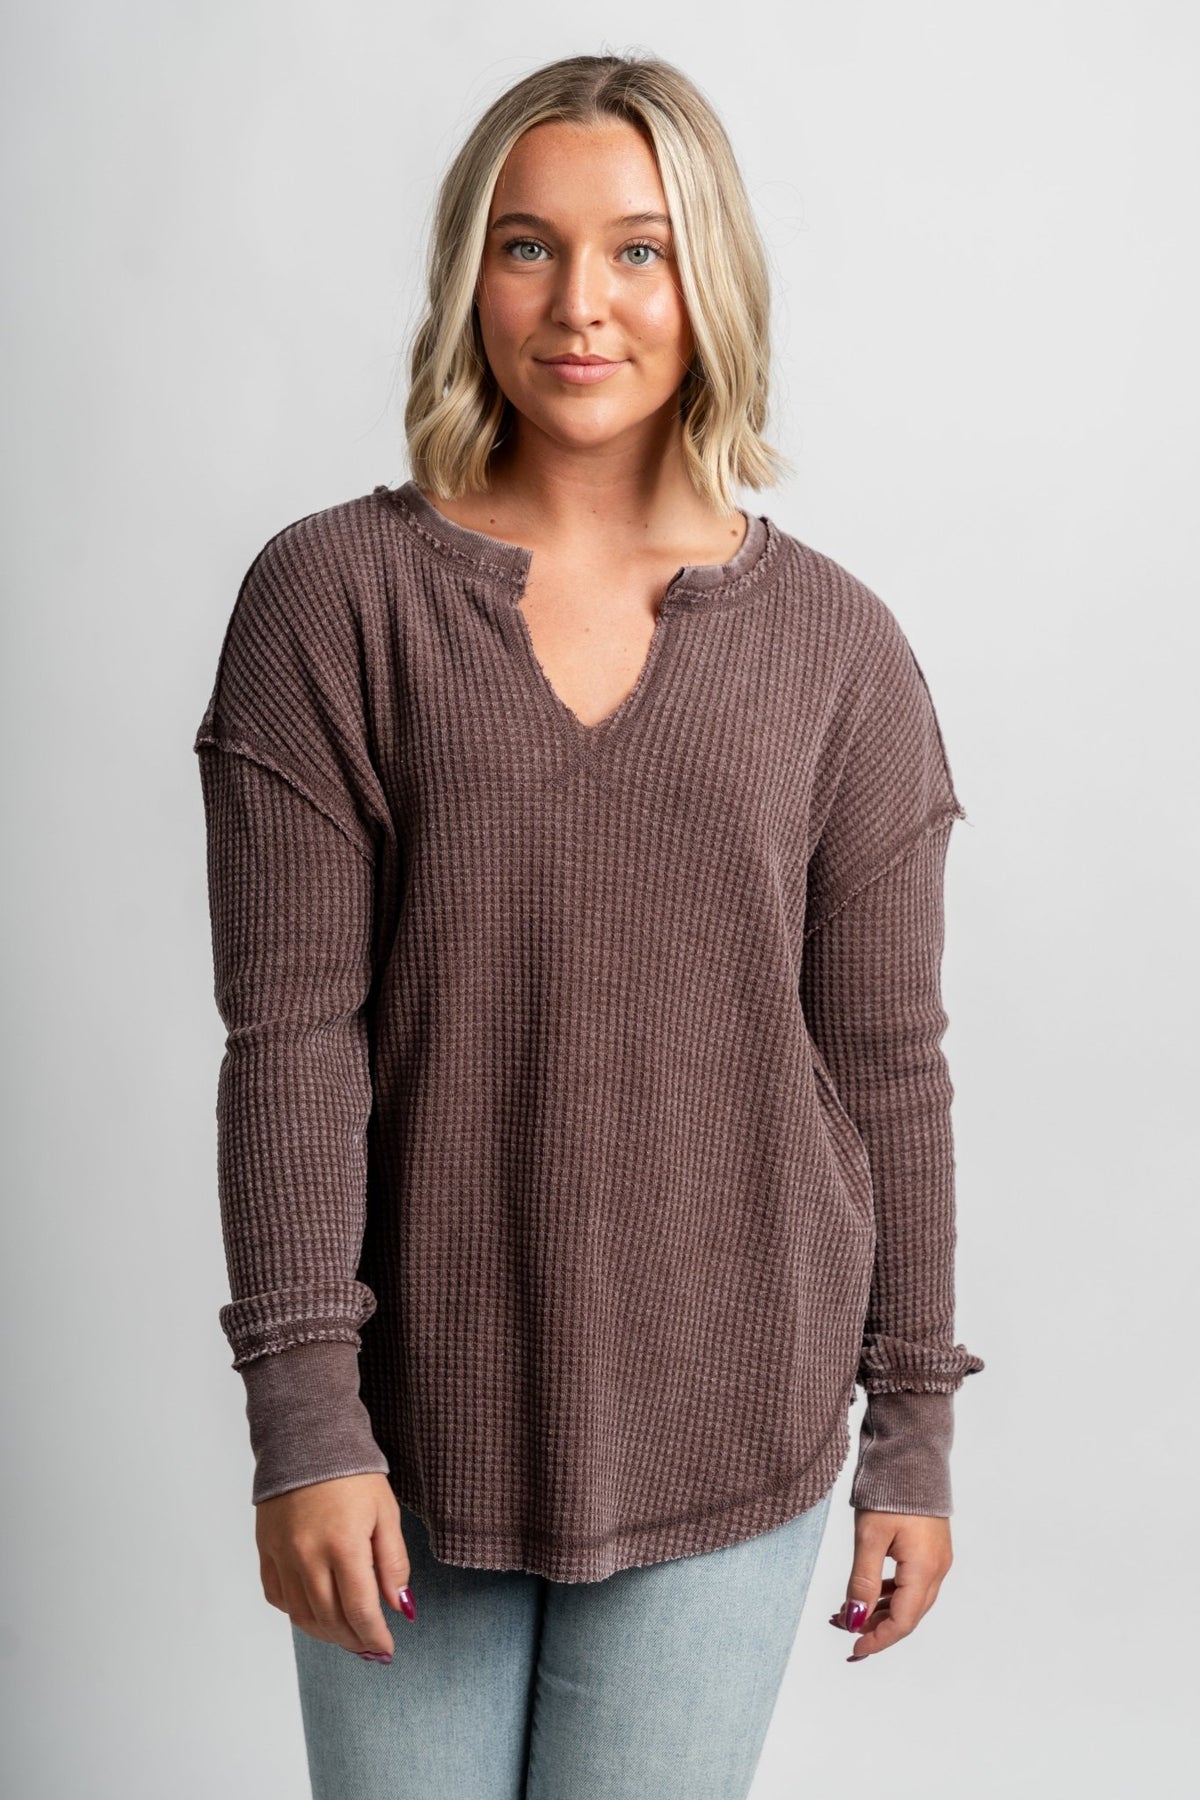 Z Supply thermal long sleeve top dark truffle - Z Supply top - Z Supply Tops, Dresses, Tanks, Tees, Cardigans, Joggers and Loungewear at Lush Fashion Lounge